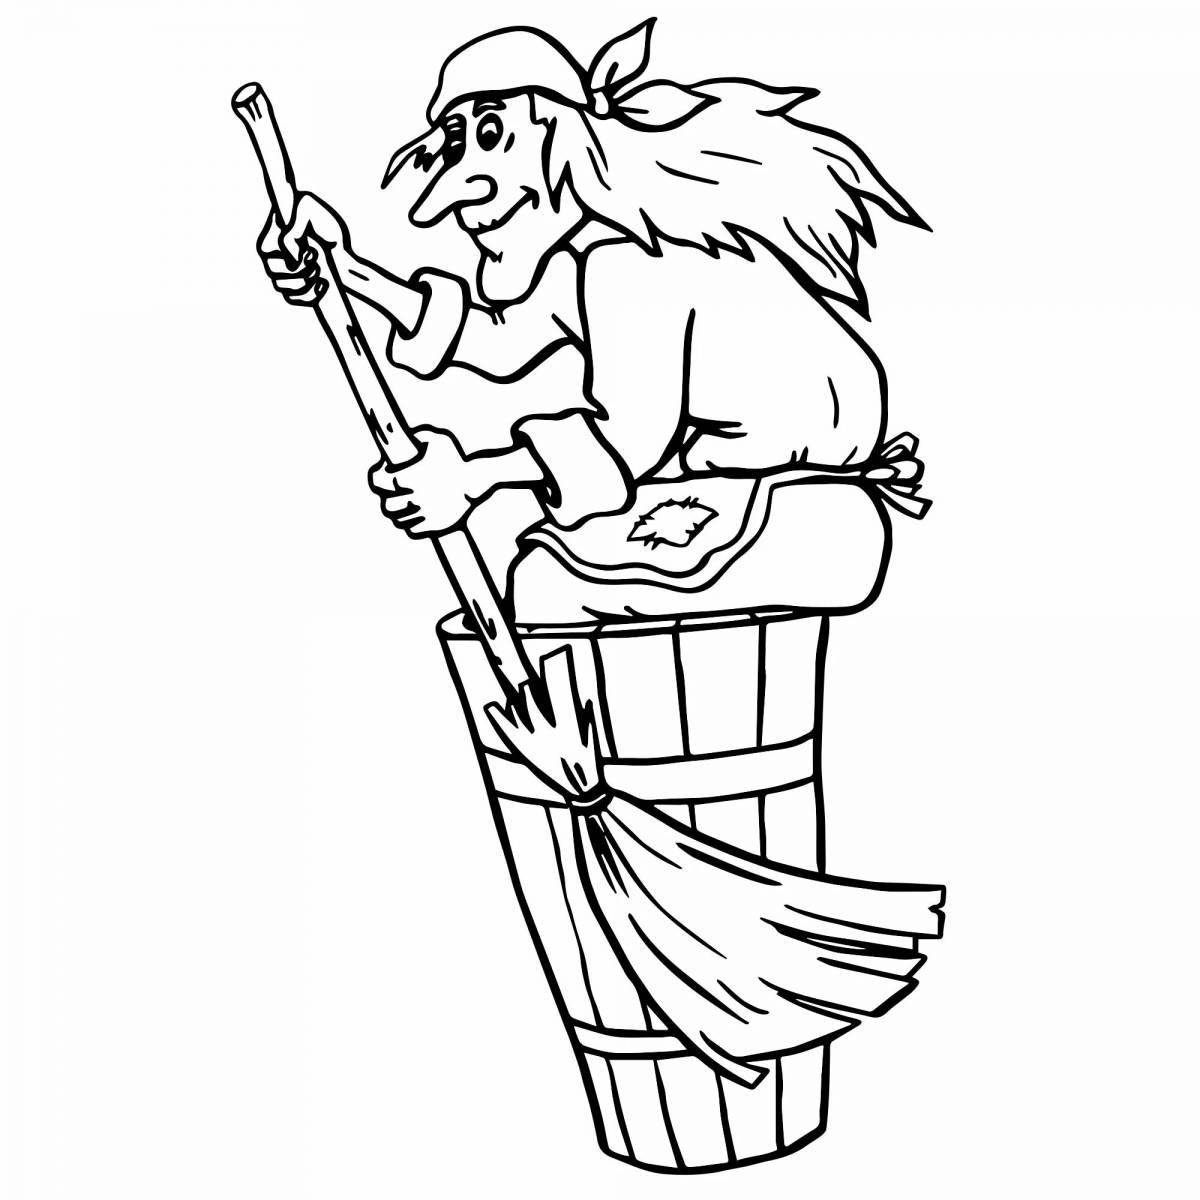 Fancy Baba Yaga coloring pages for kids